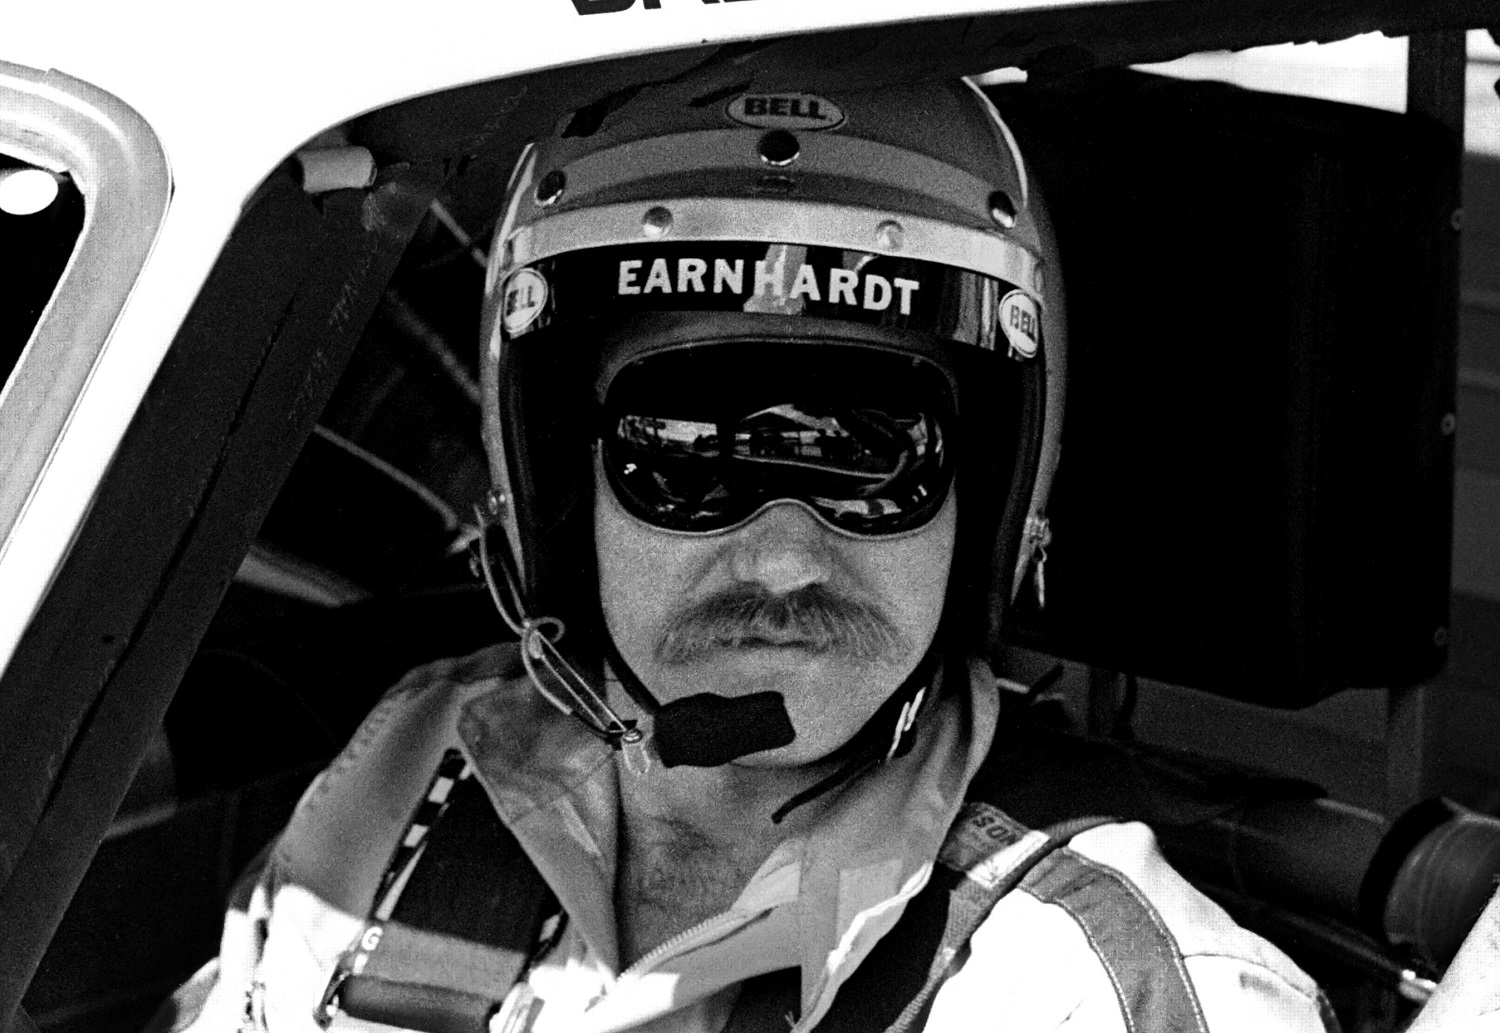 1979 NASCAR Rookie of the Year Award winner Dale Earnhardt sits in his car at the Daytona International Speedway prior to the start of the 1980 Daytona 500. | Robert Alexander/Archive Photos/Getty Images